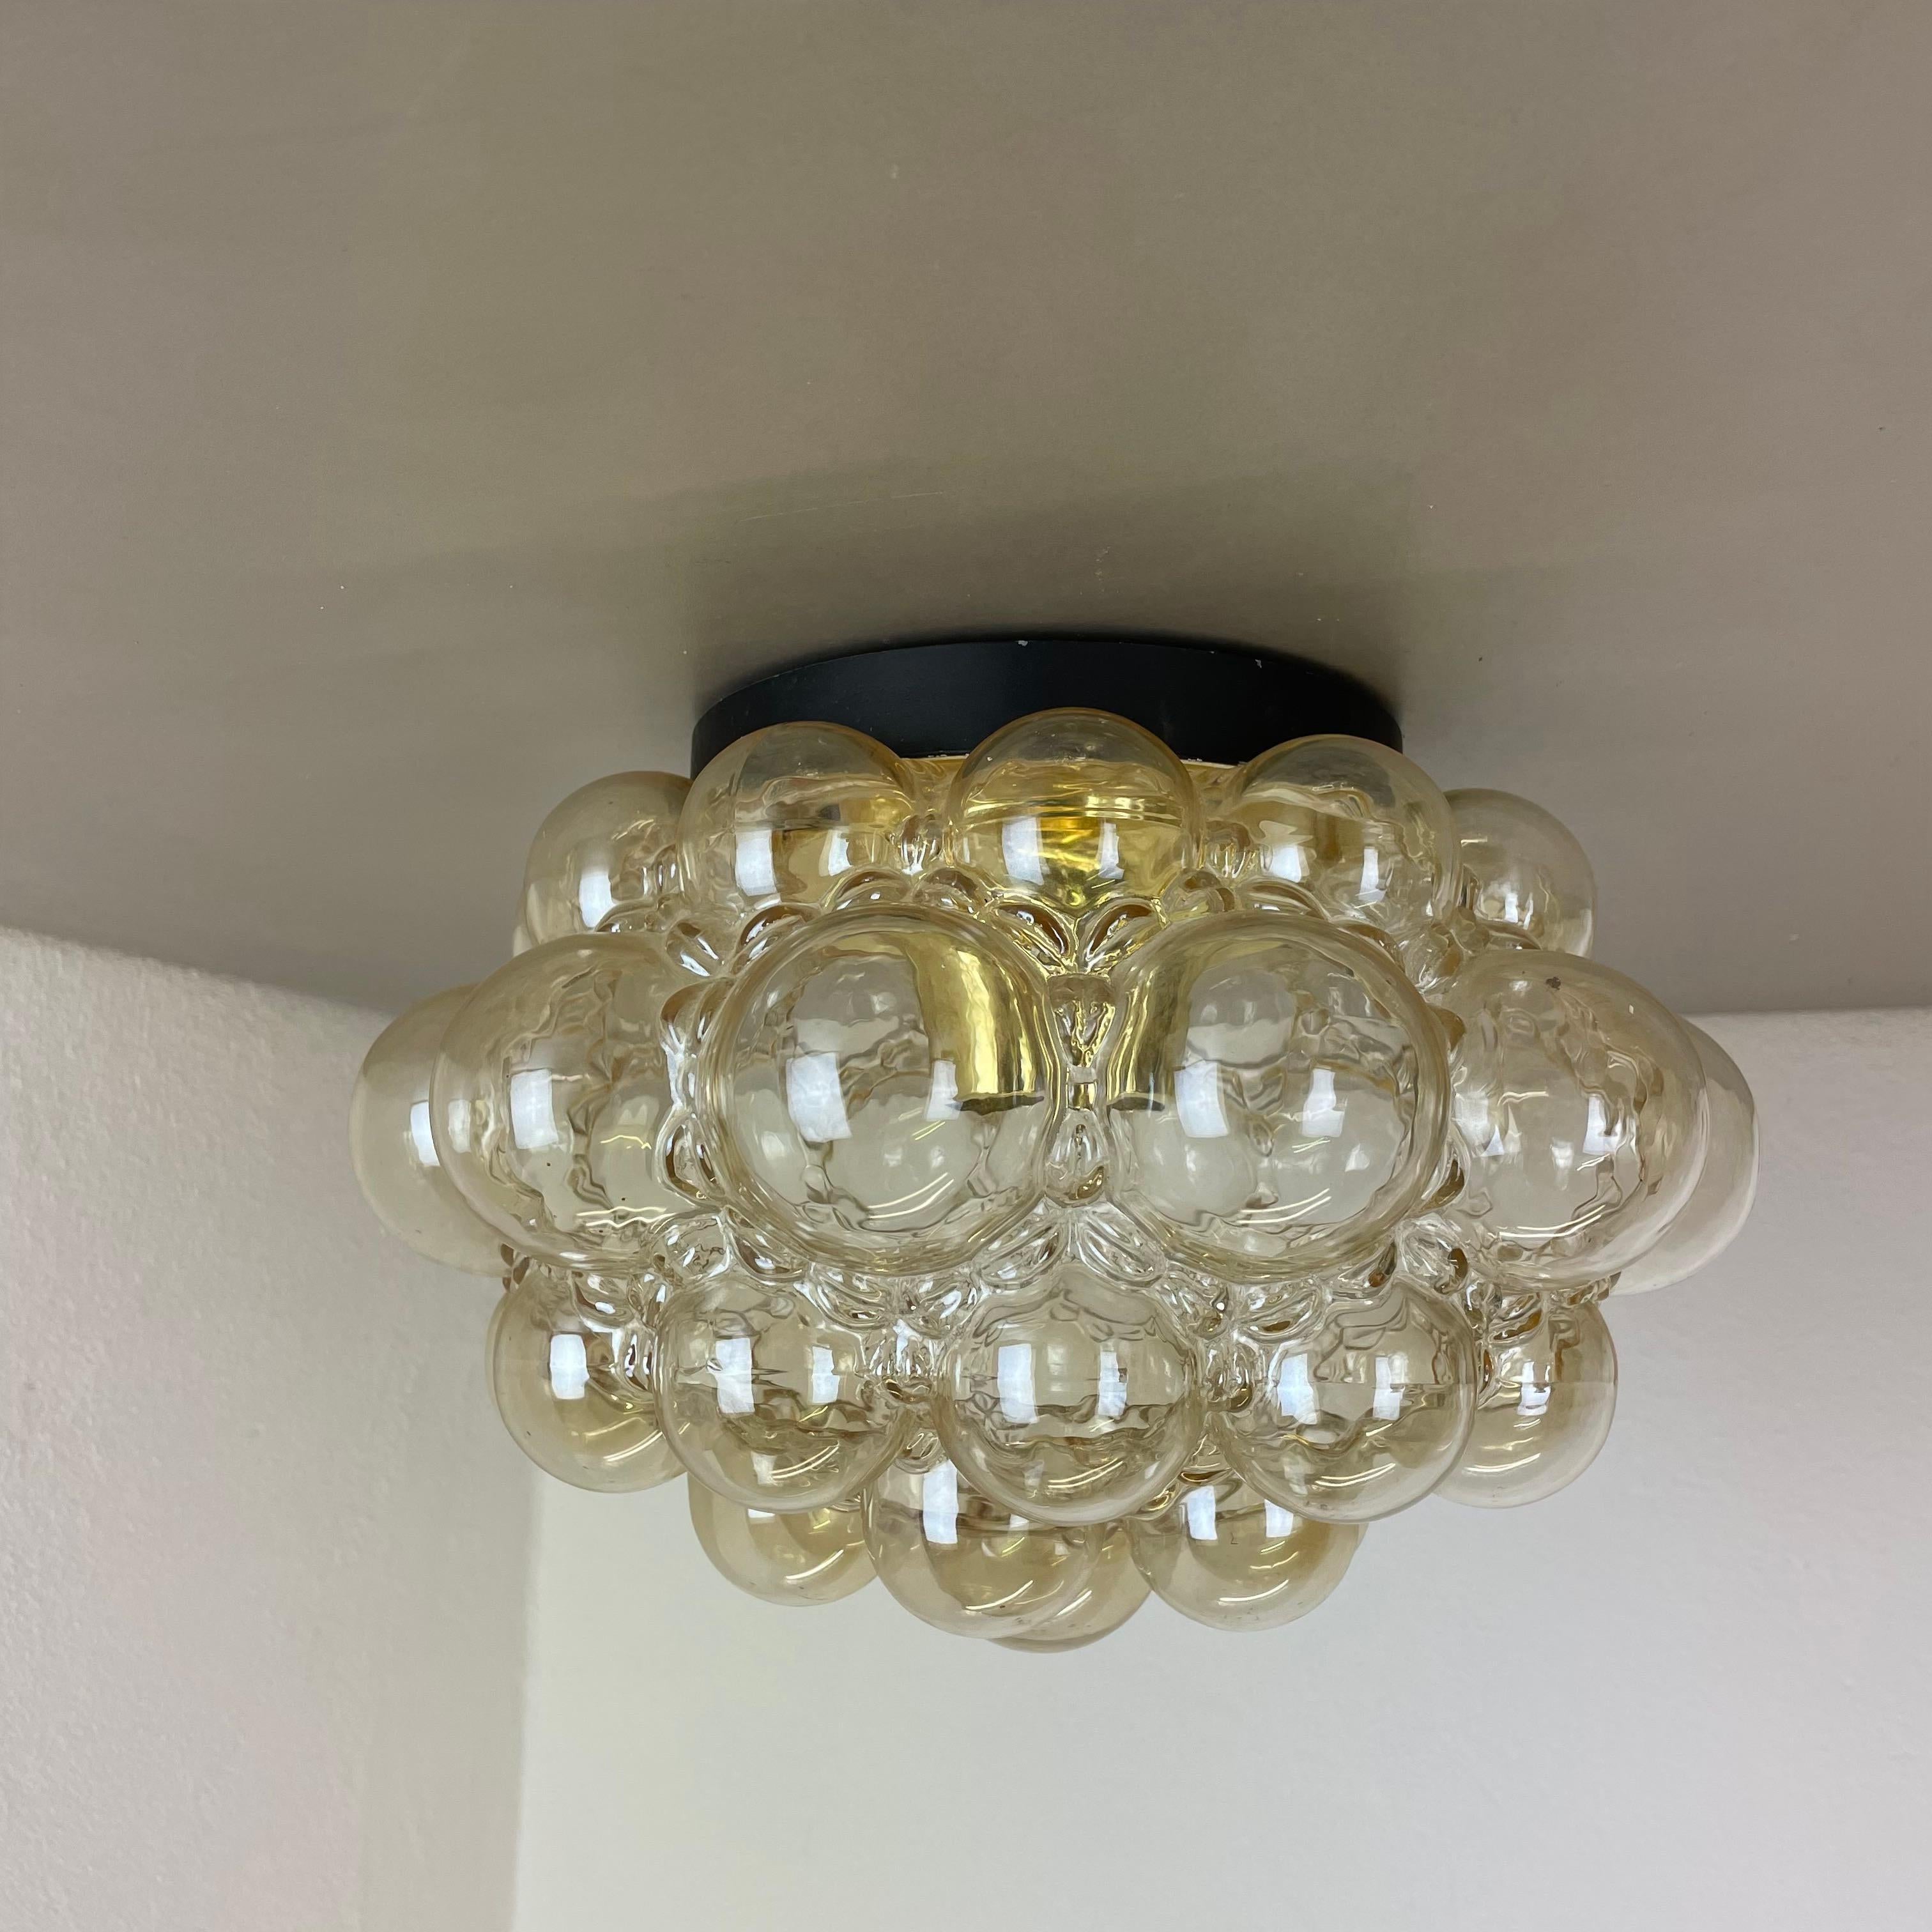 Article:

wall light  ceiling light



Producer: 

Glashütte Limburg, Germany


Design:

Helena Tynell


Origin: 

Germany


Age: 

1970s





This fantastic glass ceiling light was designed by Helena Tynell and produced in 1960s in Germany by